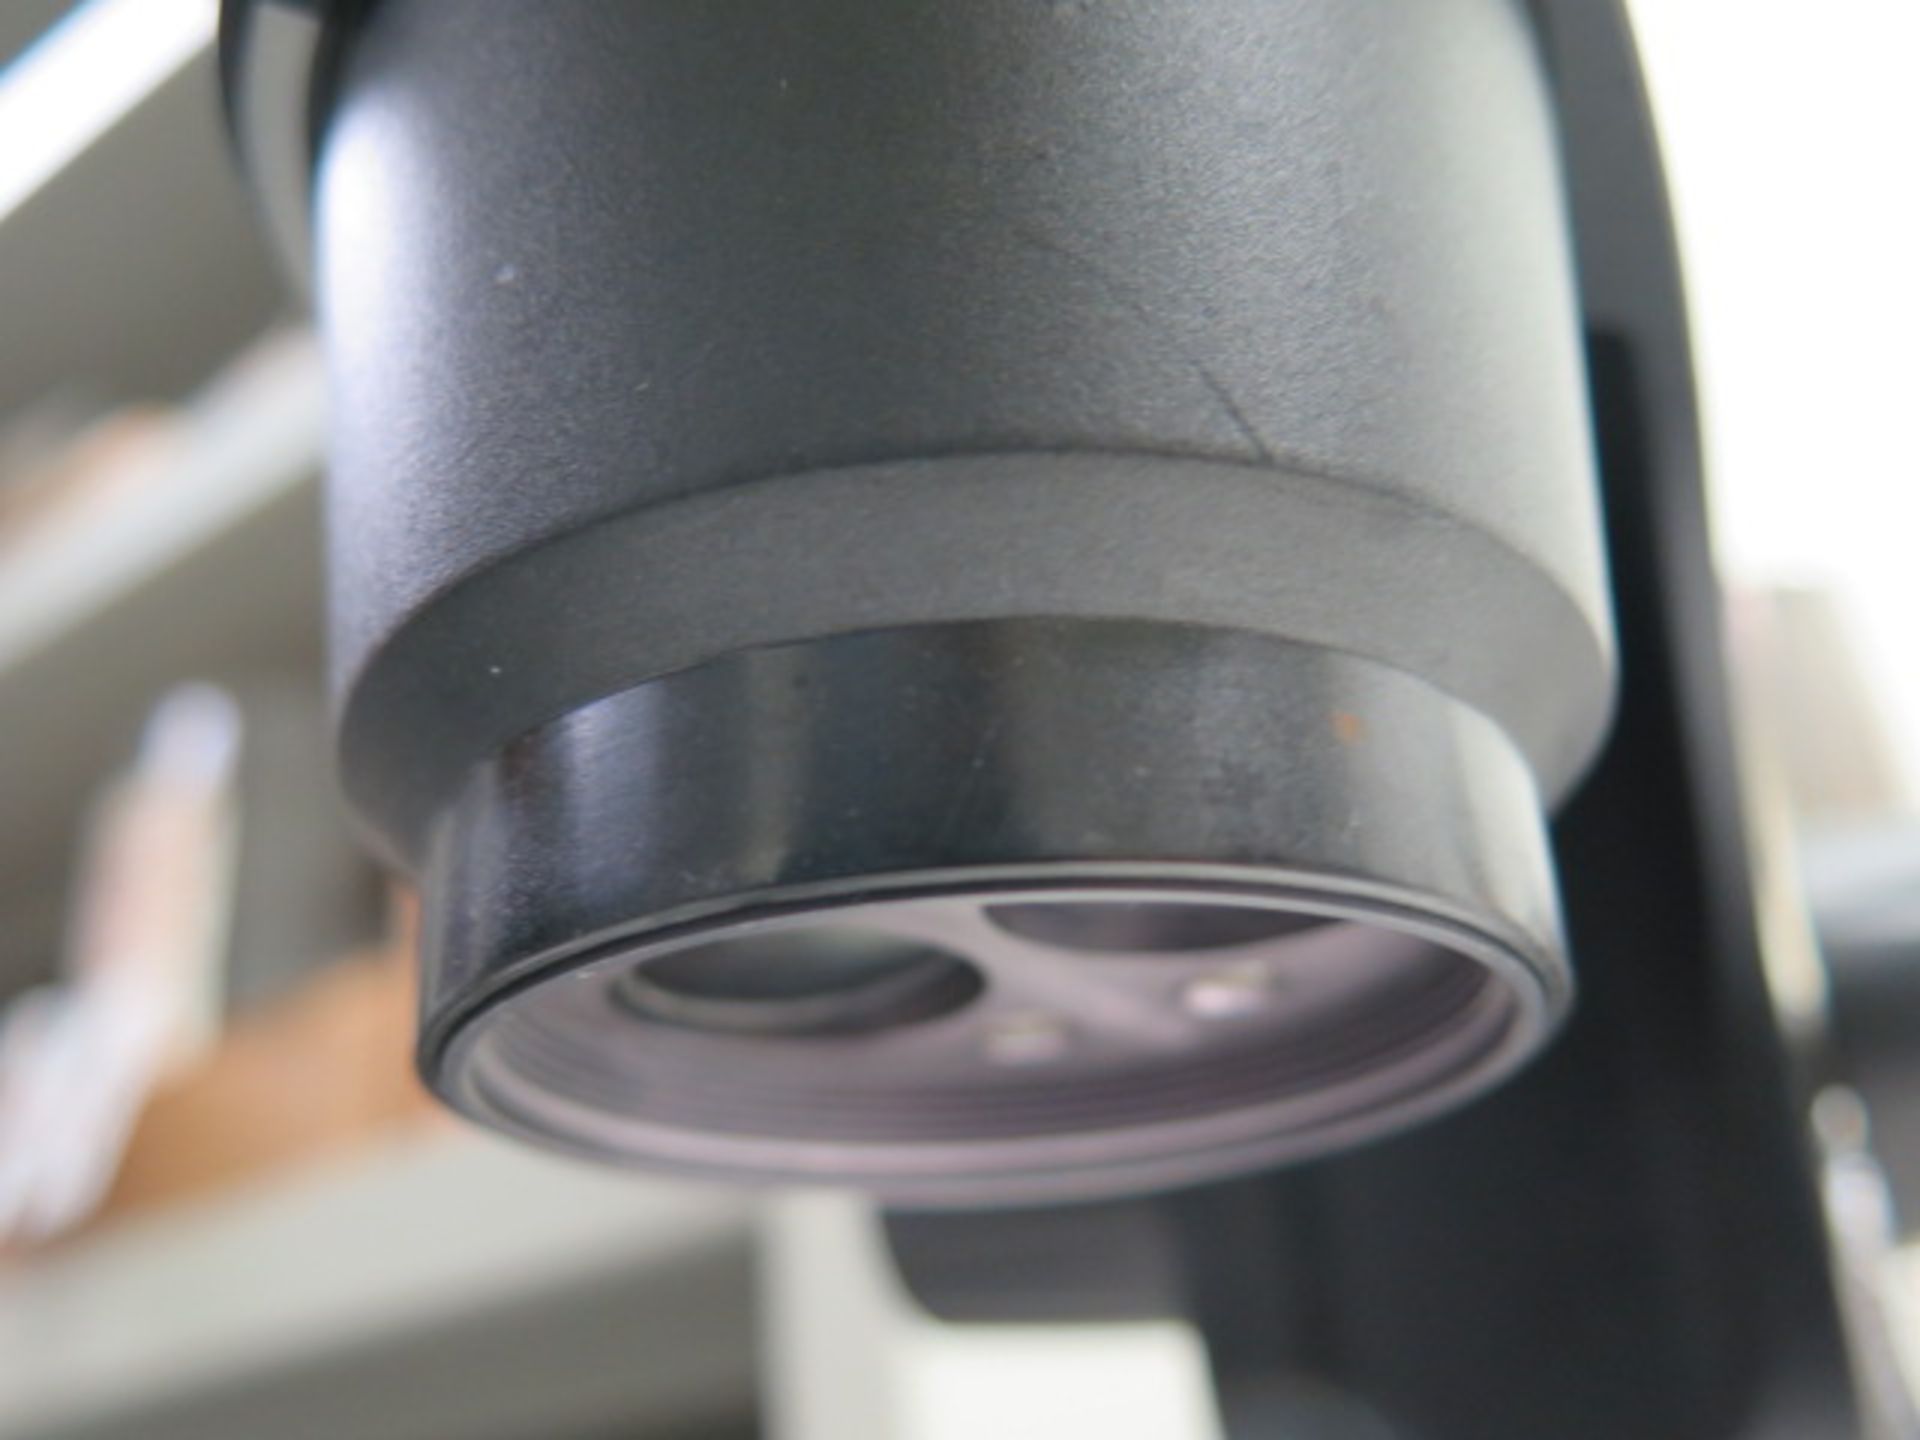 Leica S6E Stereo Microscope w/ Dolan-Jenner Fiber-Light Source (SOLD AS-IS - NO WARRANTY) - Image 5 of 8